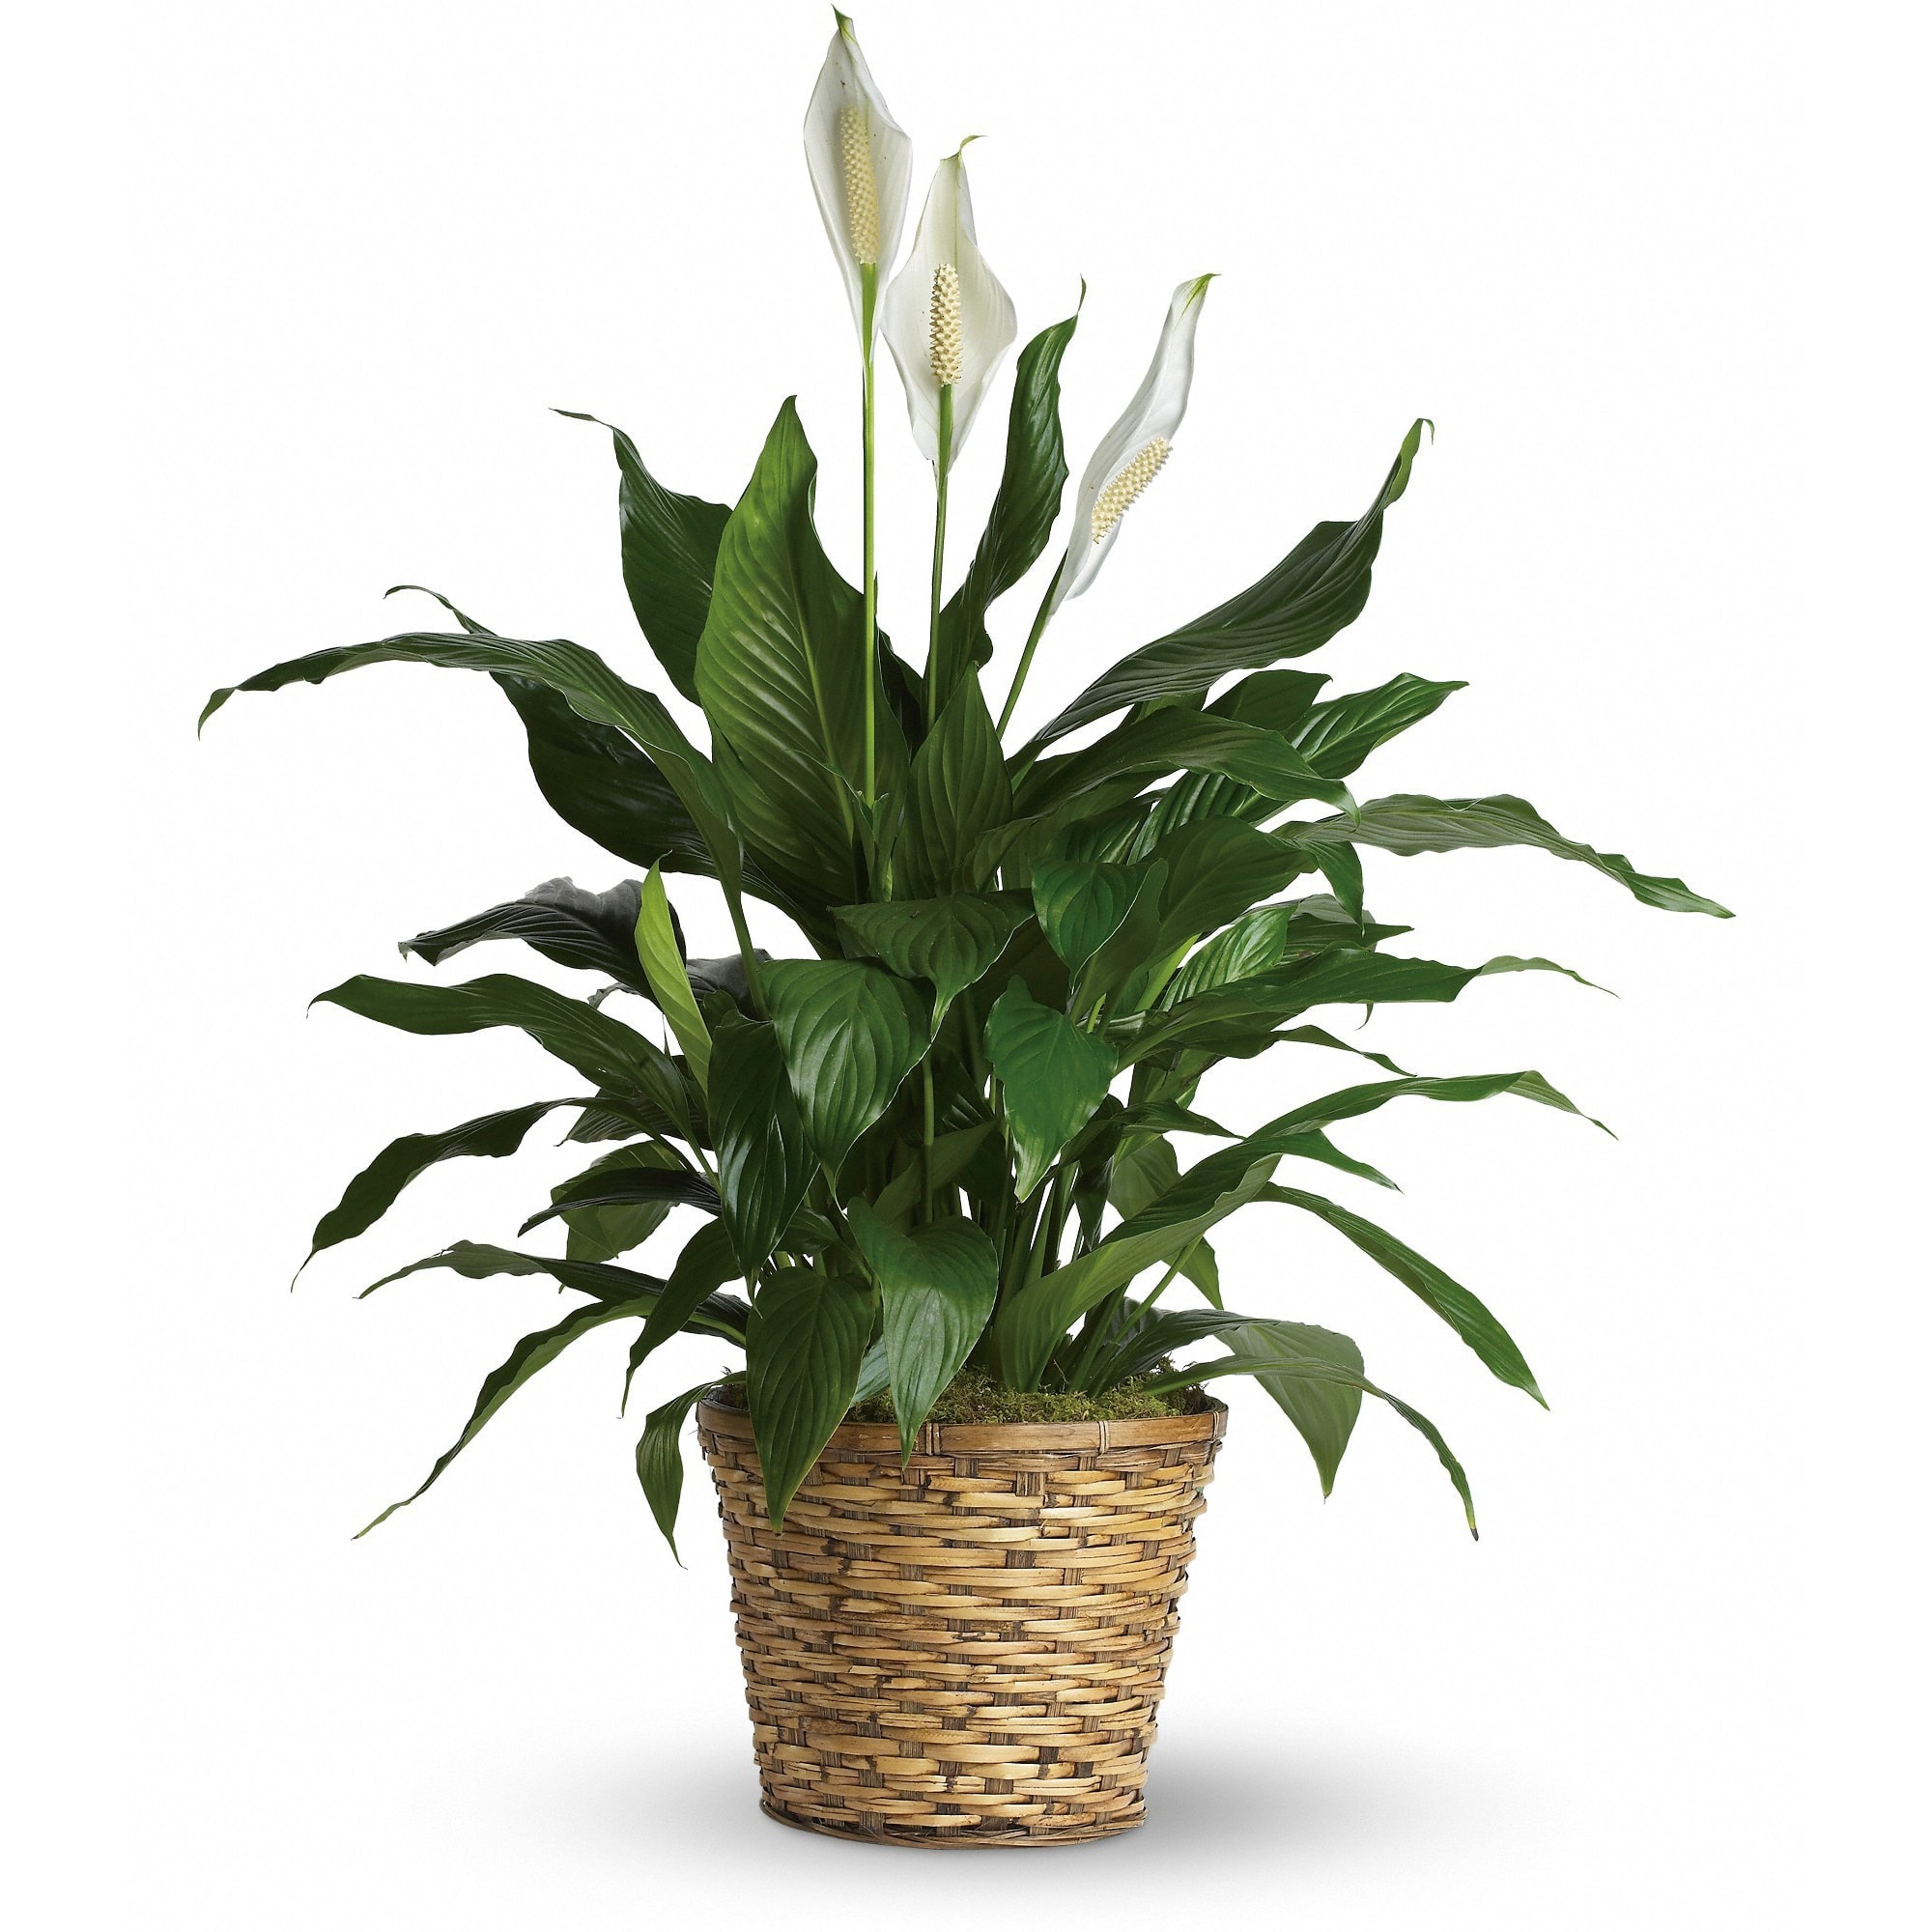 Simply Elegant Spathiphyllum - Medium - Known for its indoor beauty and ability to clear the air of contaminants, this brilliant green plant with dazzling white blossoms makes a perfect gift for almost any occasion. low-maintenance. High quality. Bet you never knew delivering elegance could be this simple.